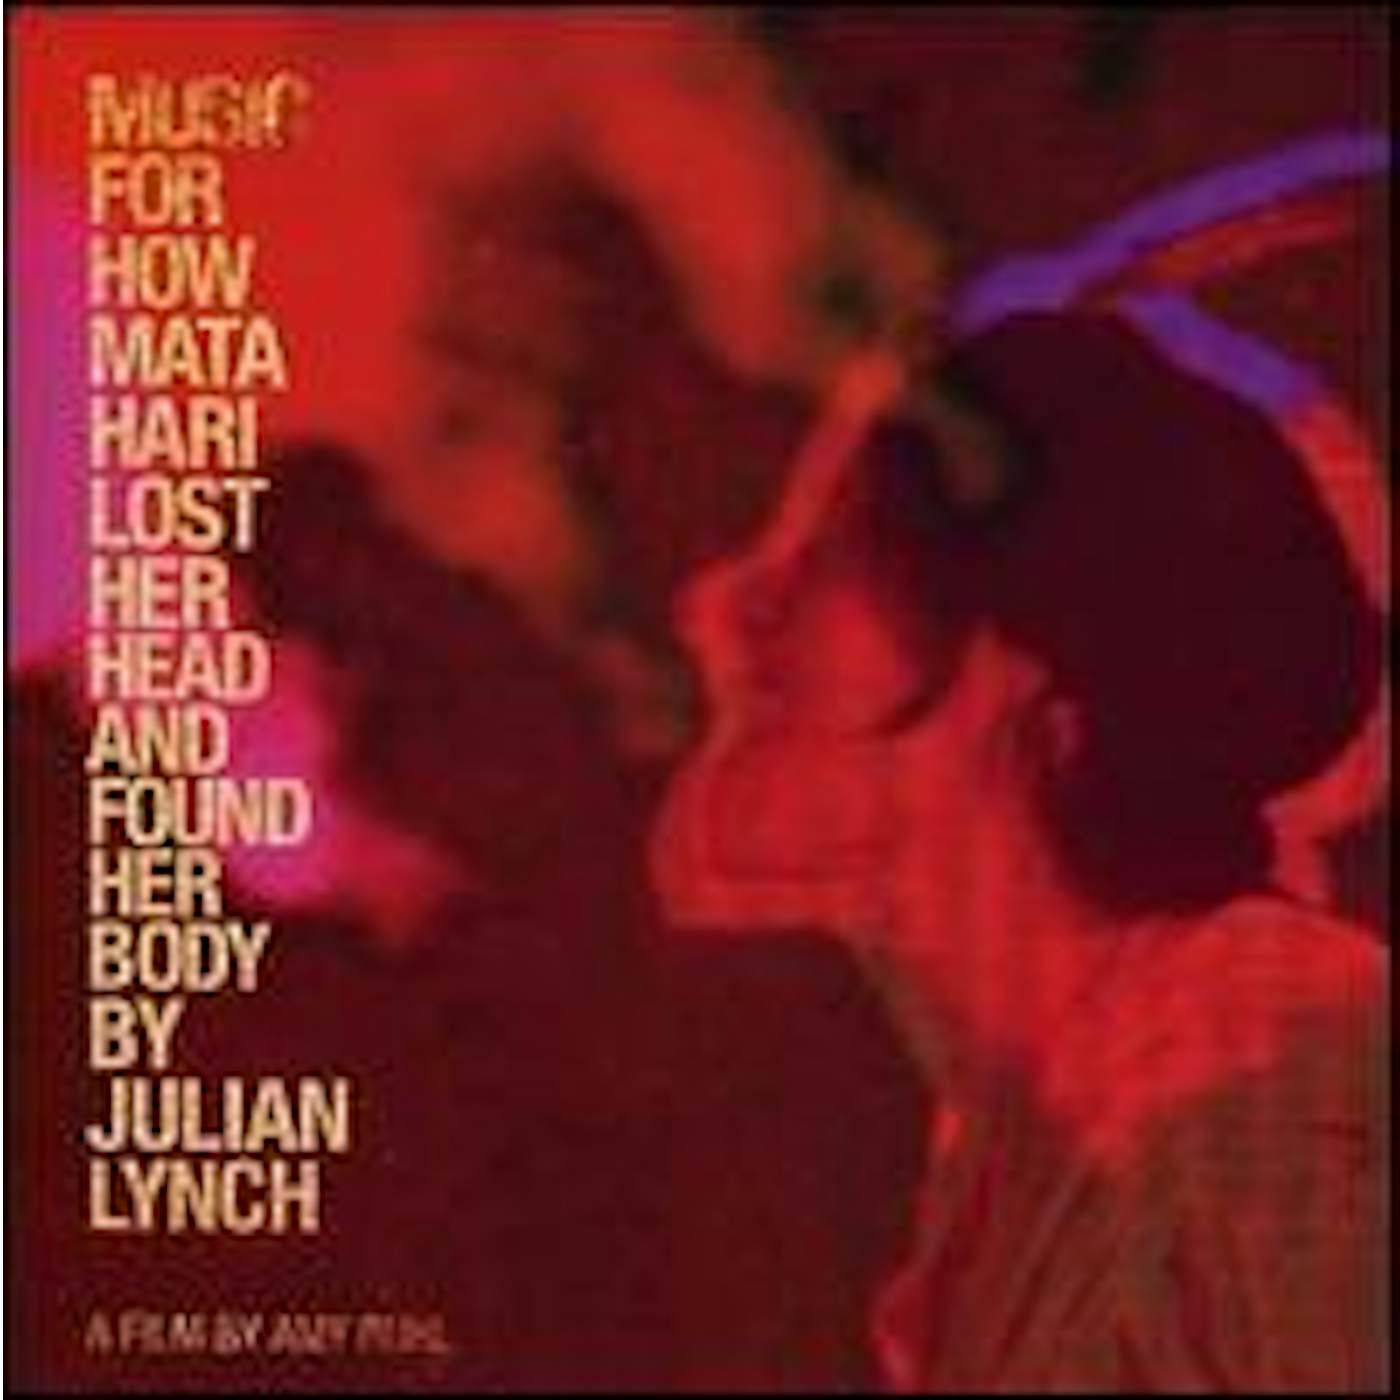 Julian Lynch MUSIC FOR HOW MATA HARI LOST HER HEAD & FOUND HER Vinyl Record